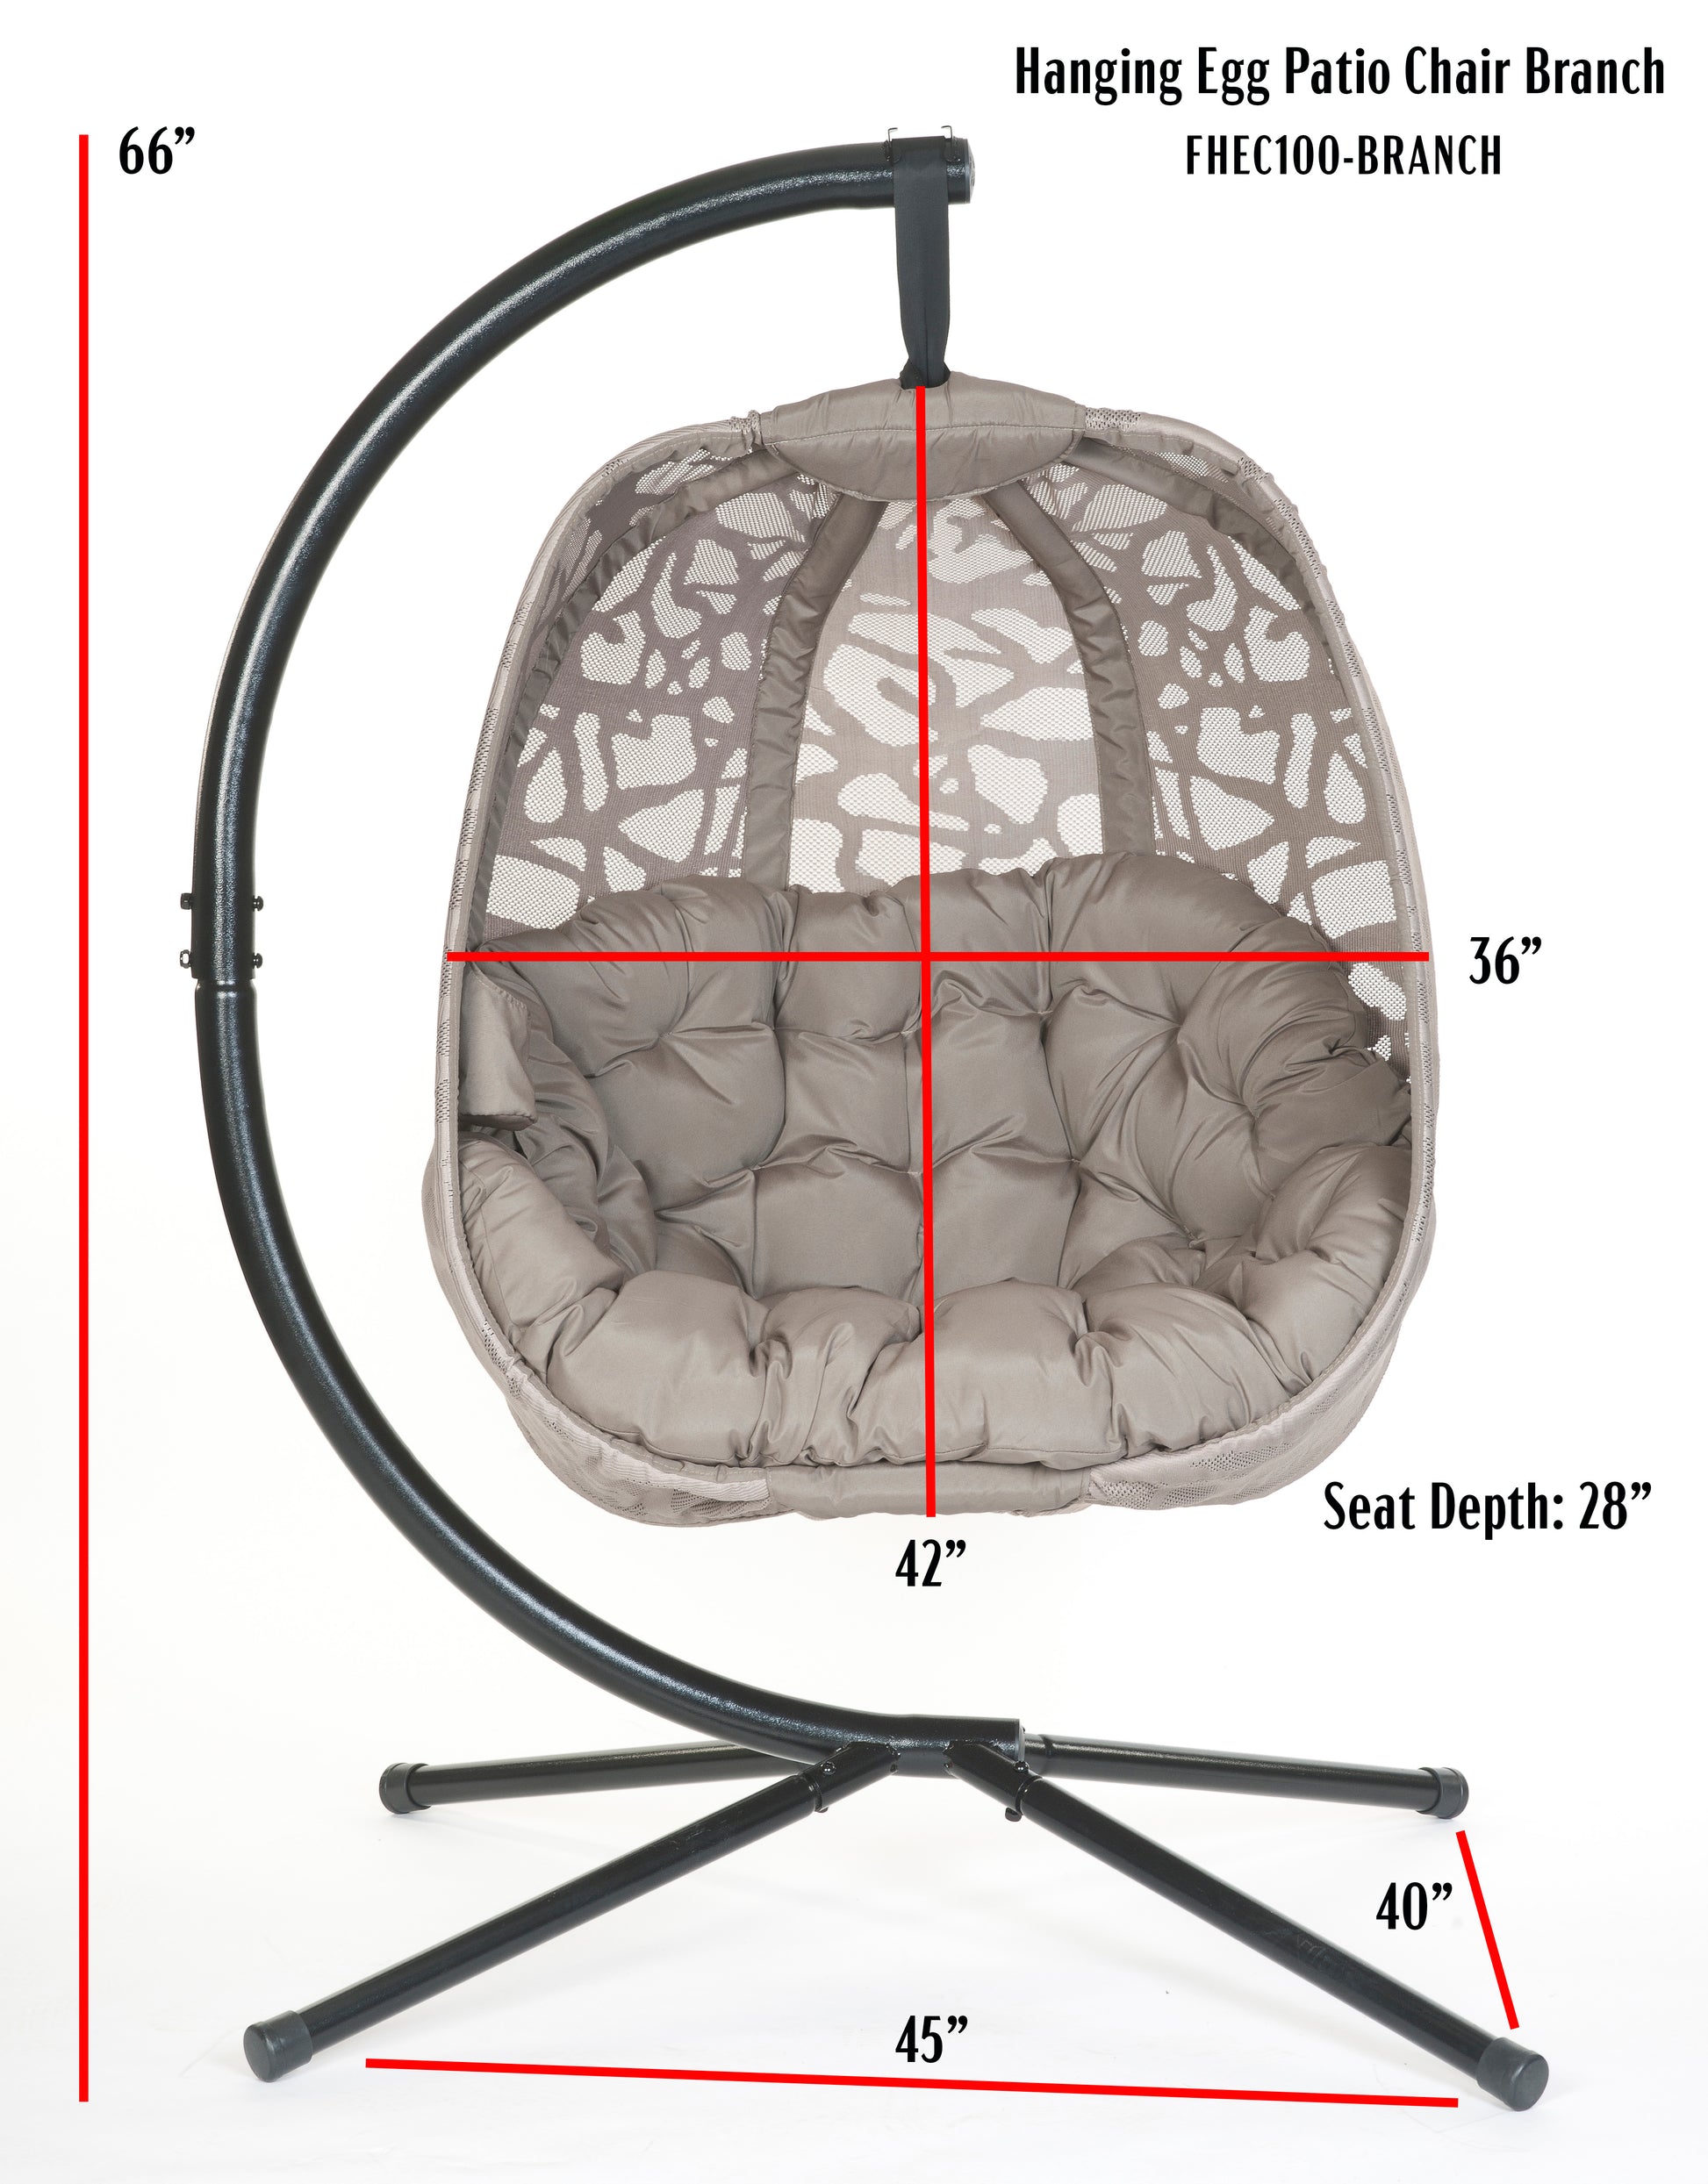 FlowerHouse Branch Hanging Egg Chair with stand - dimension details